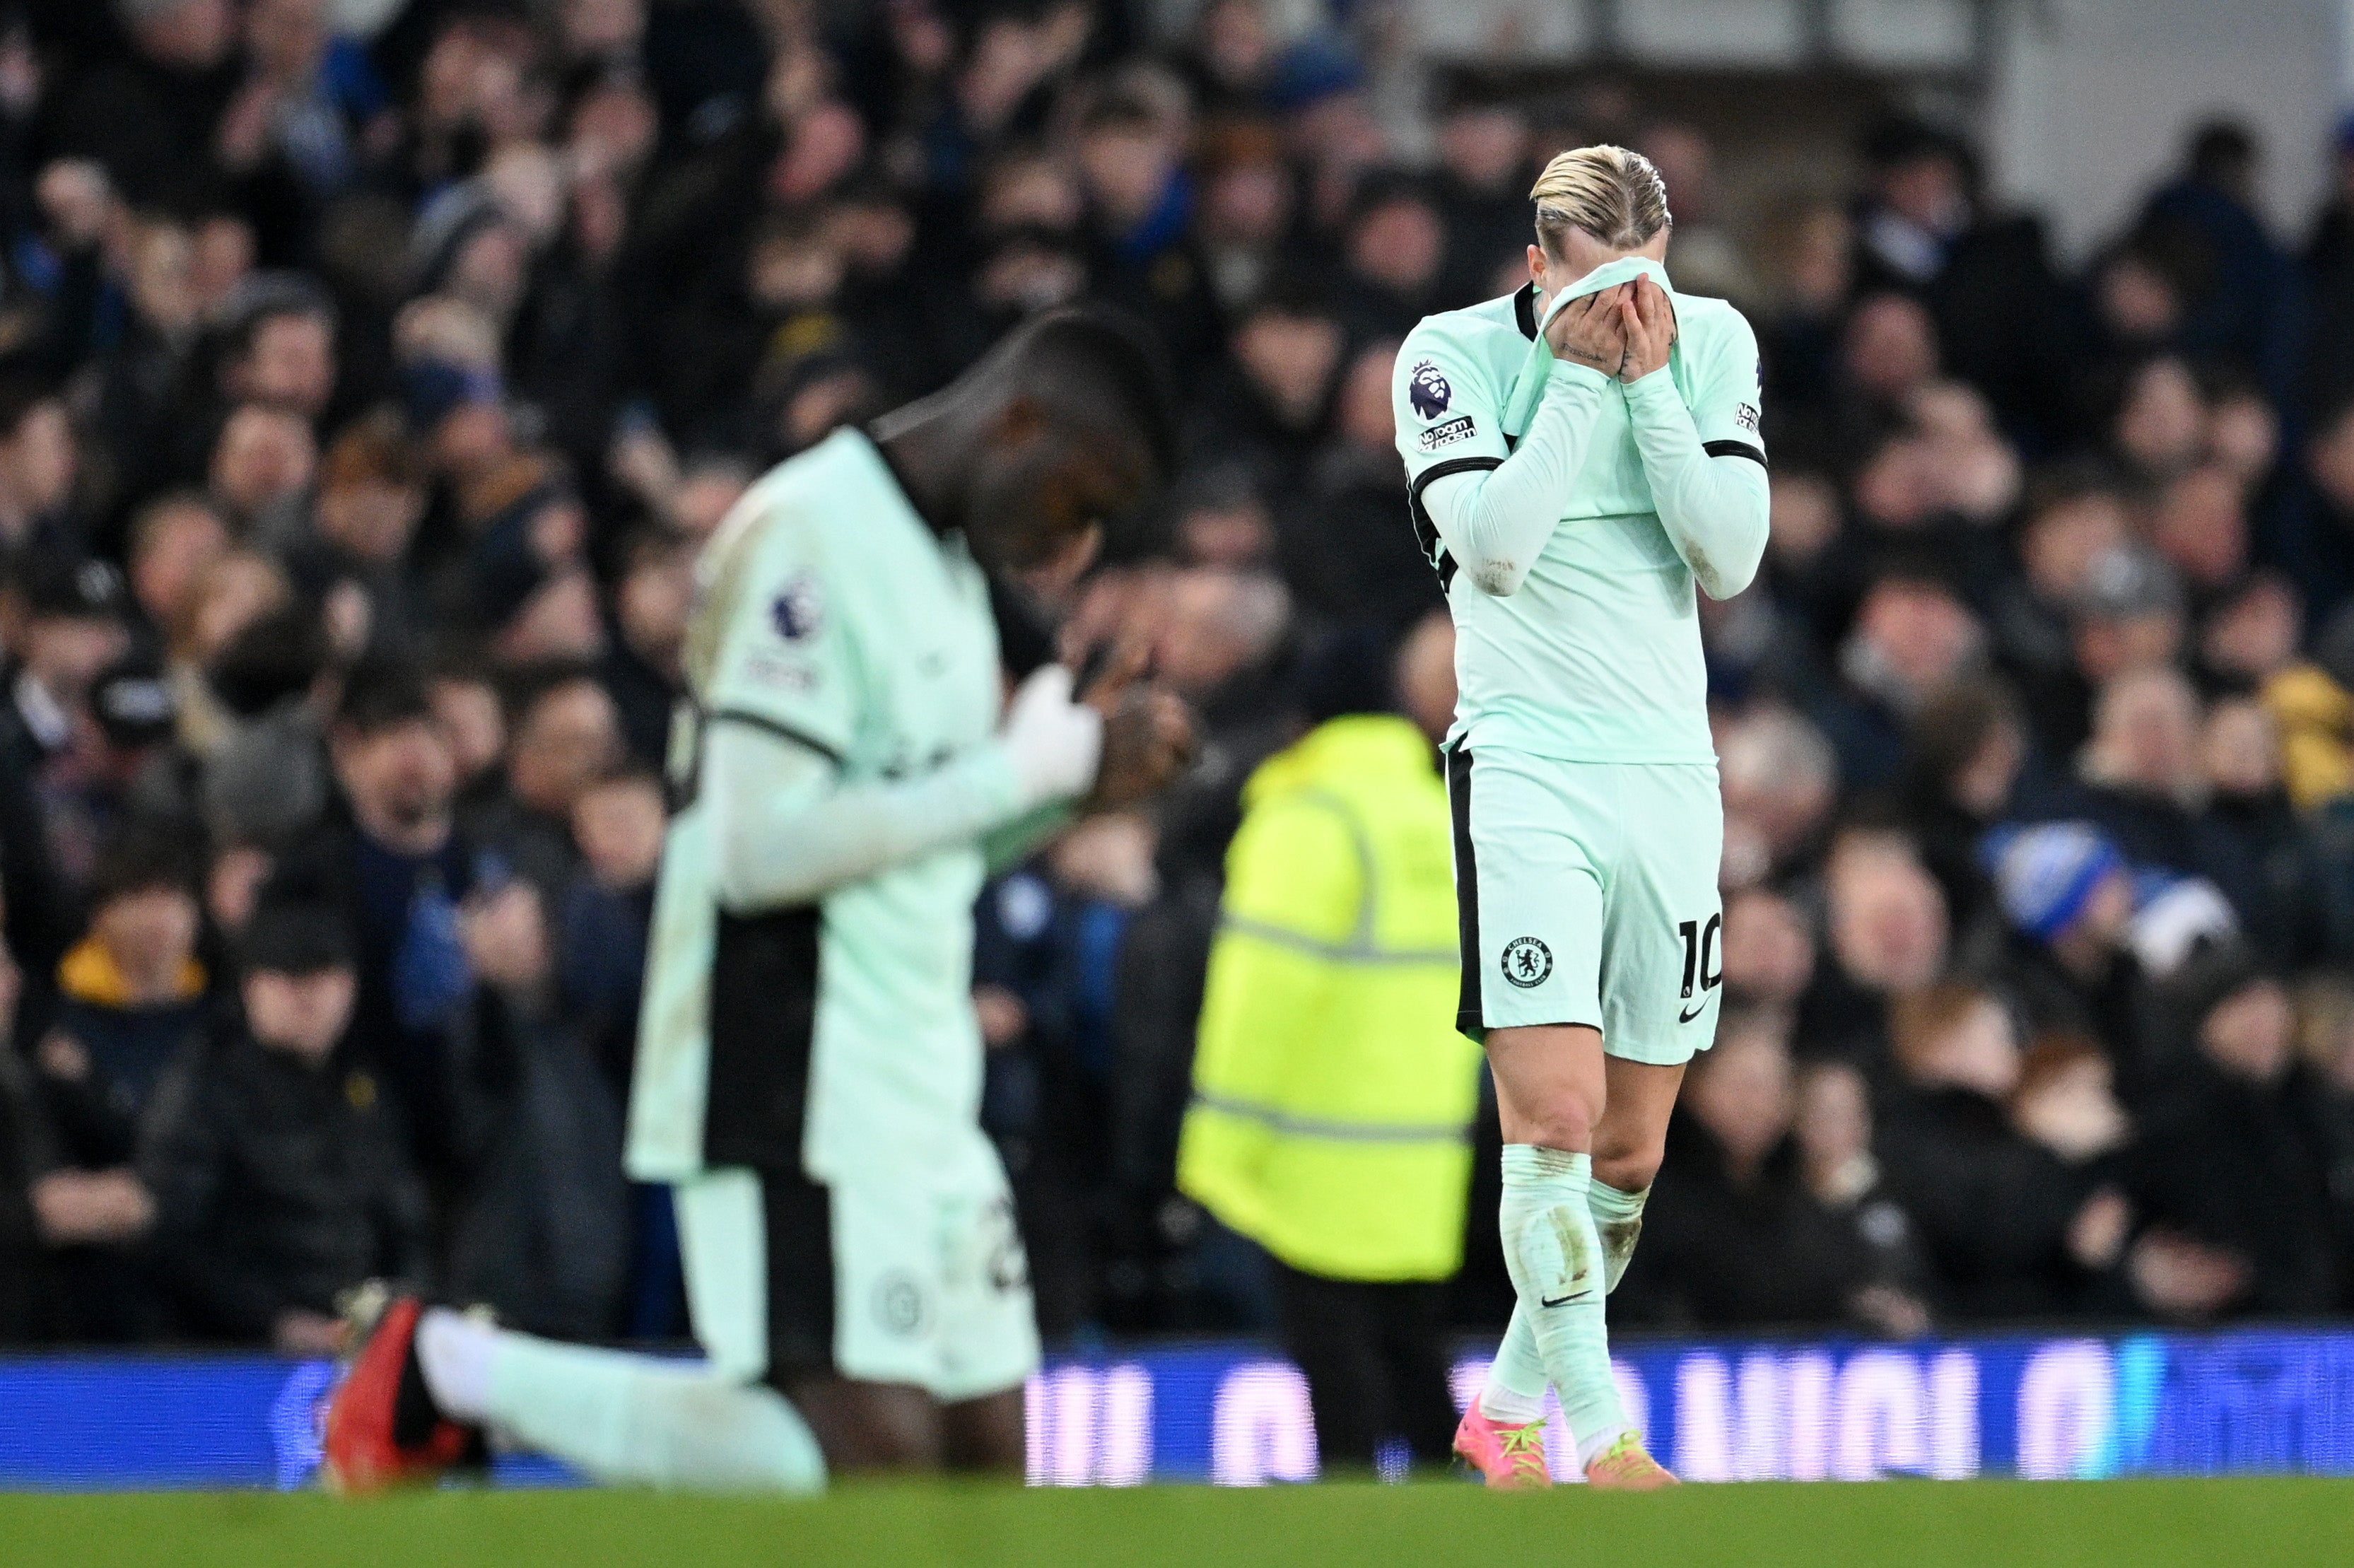 Chelsea slipped to another defeat against Everton